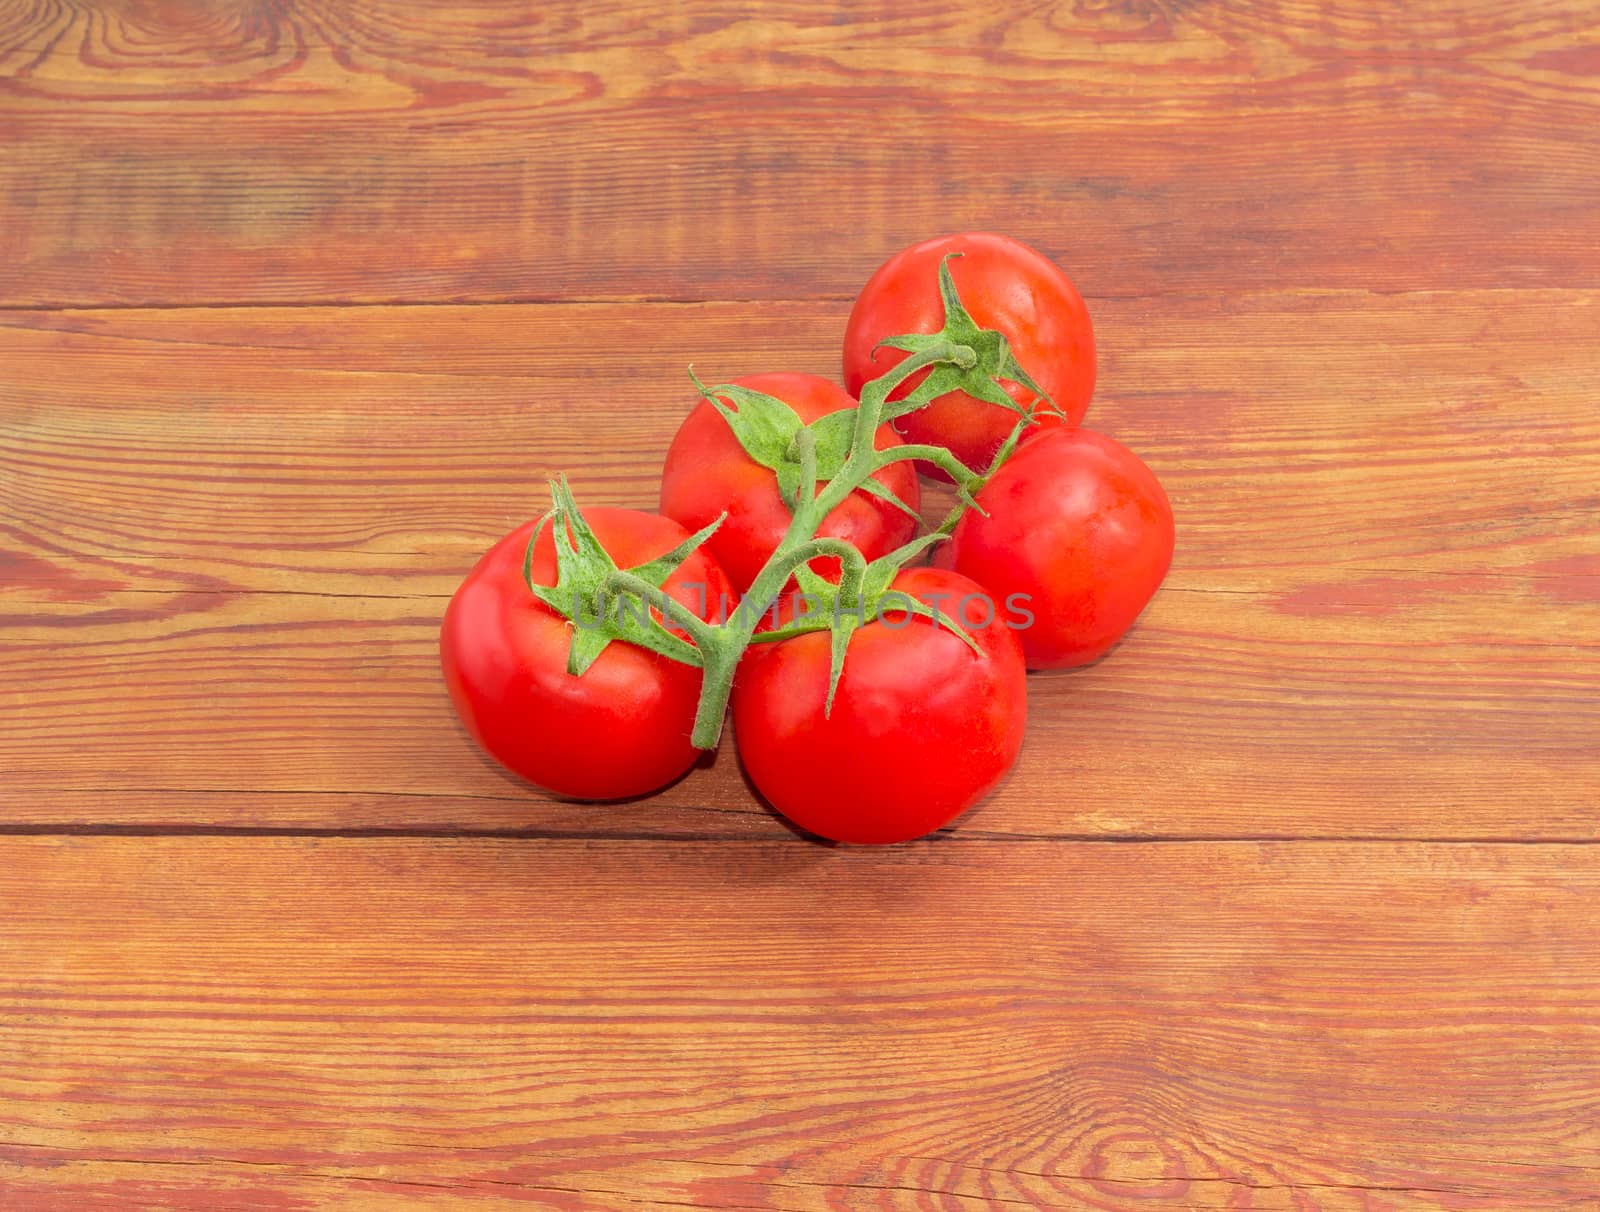 Branch of the ripe red tomatoes on the wooden surface by anmbph